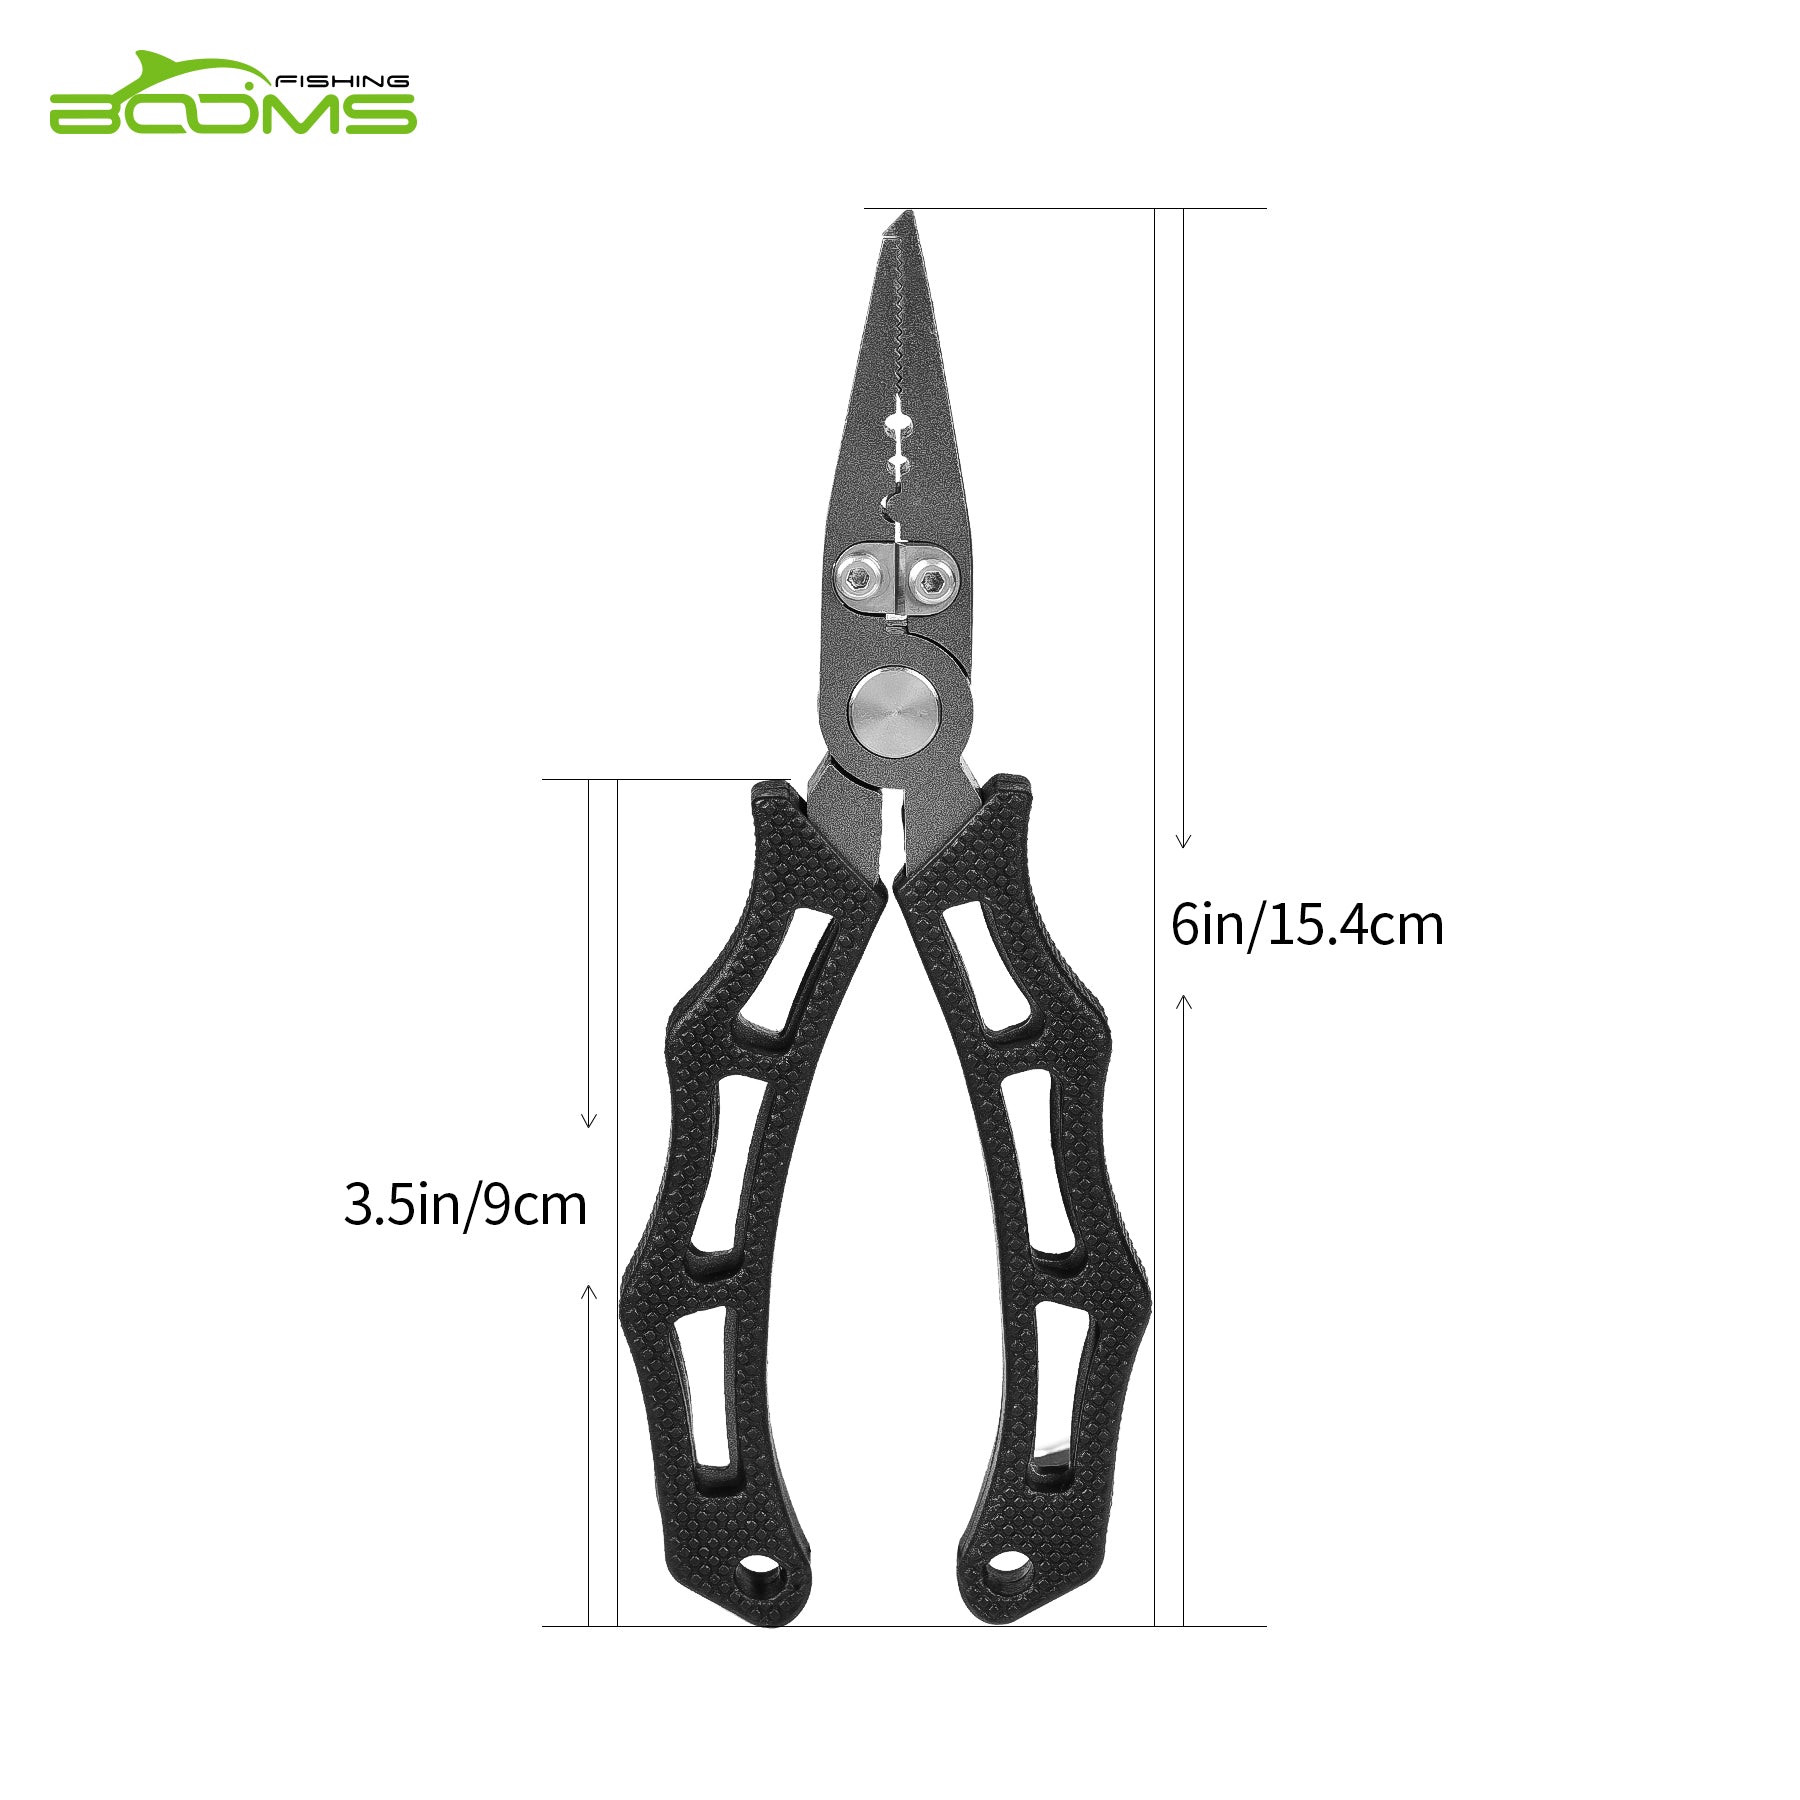 F07 Fishing Pliers Stainless Steel Construction Small Size – Booms